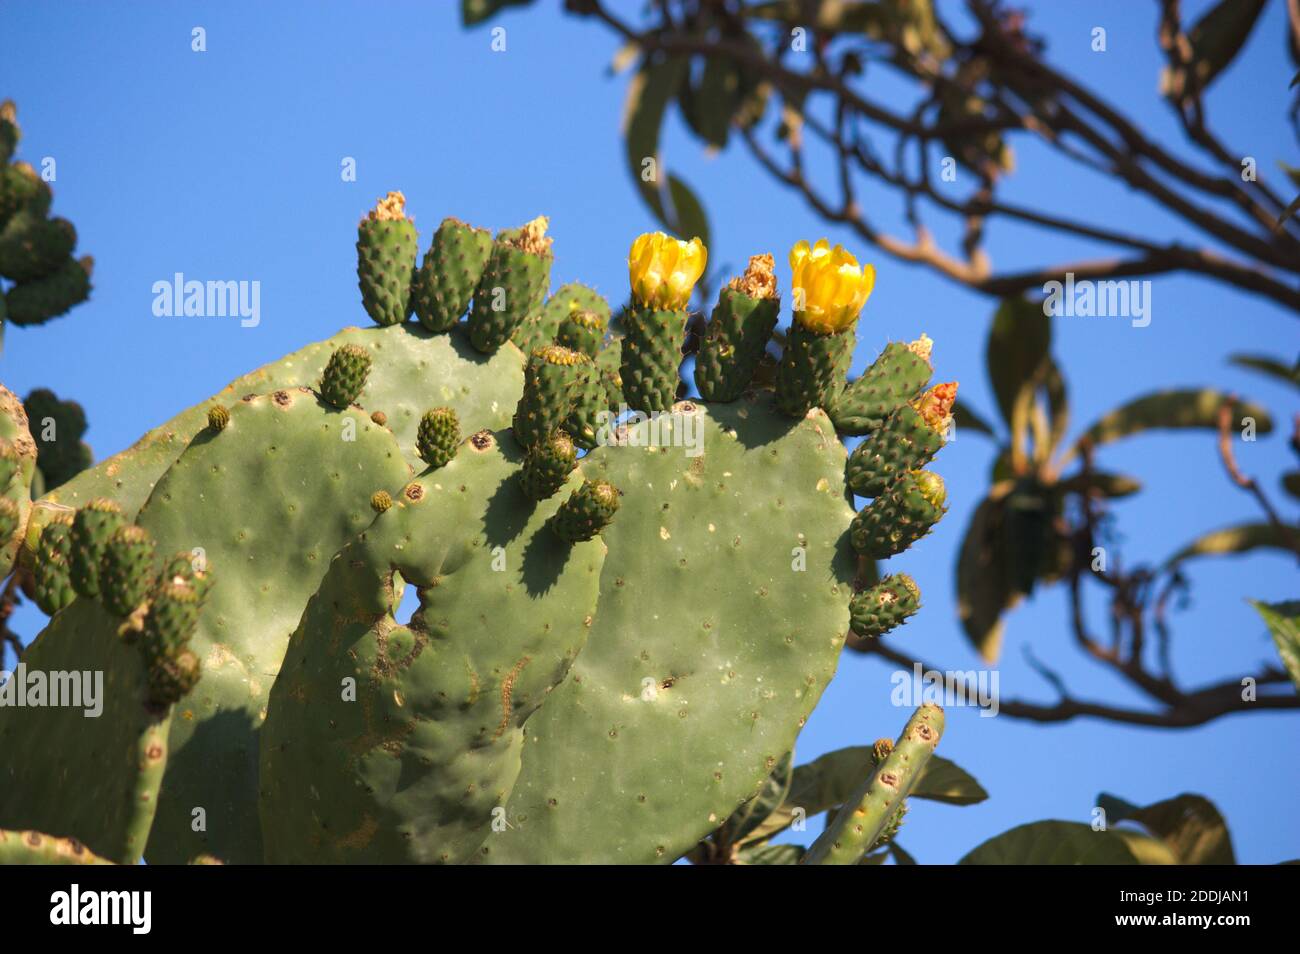 Image of part of a specimen of Opuntia ficus-indica with yellow flowers Stock Photo